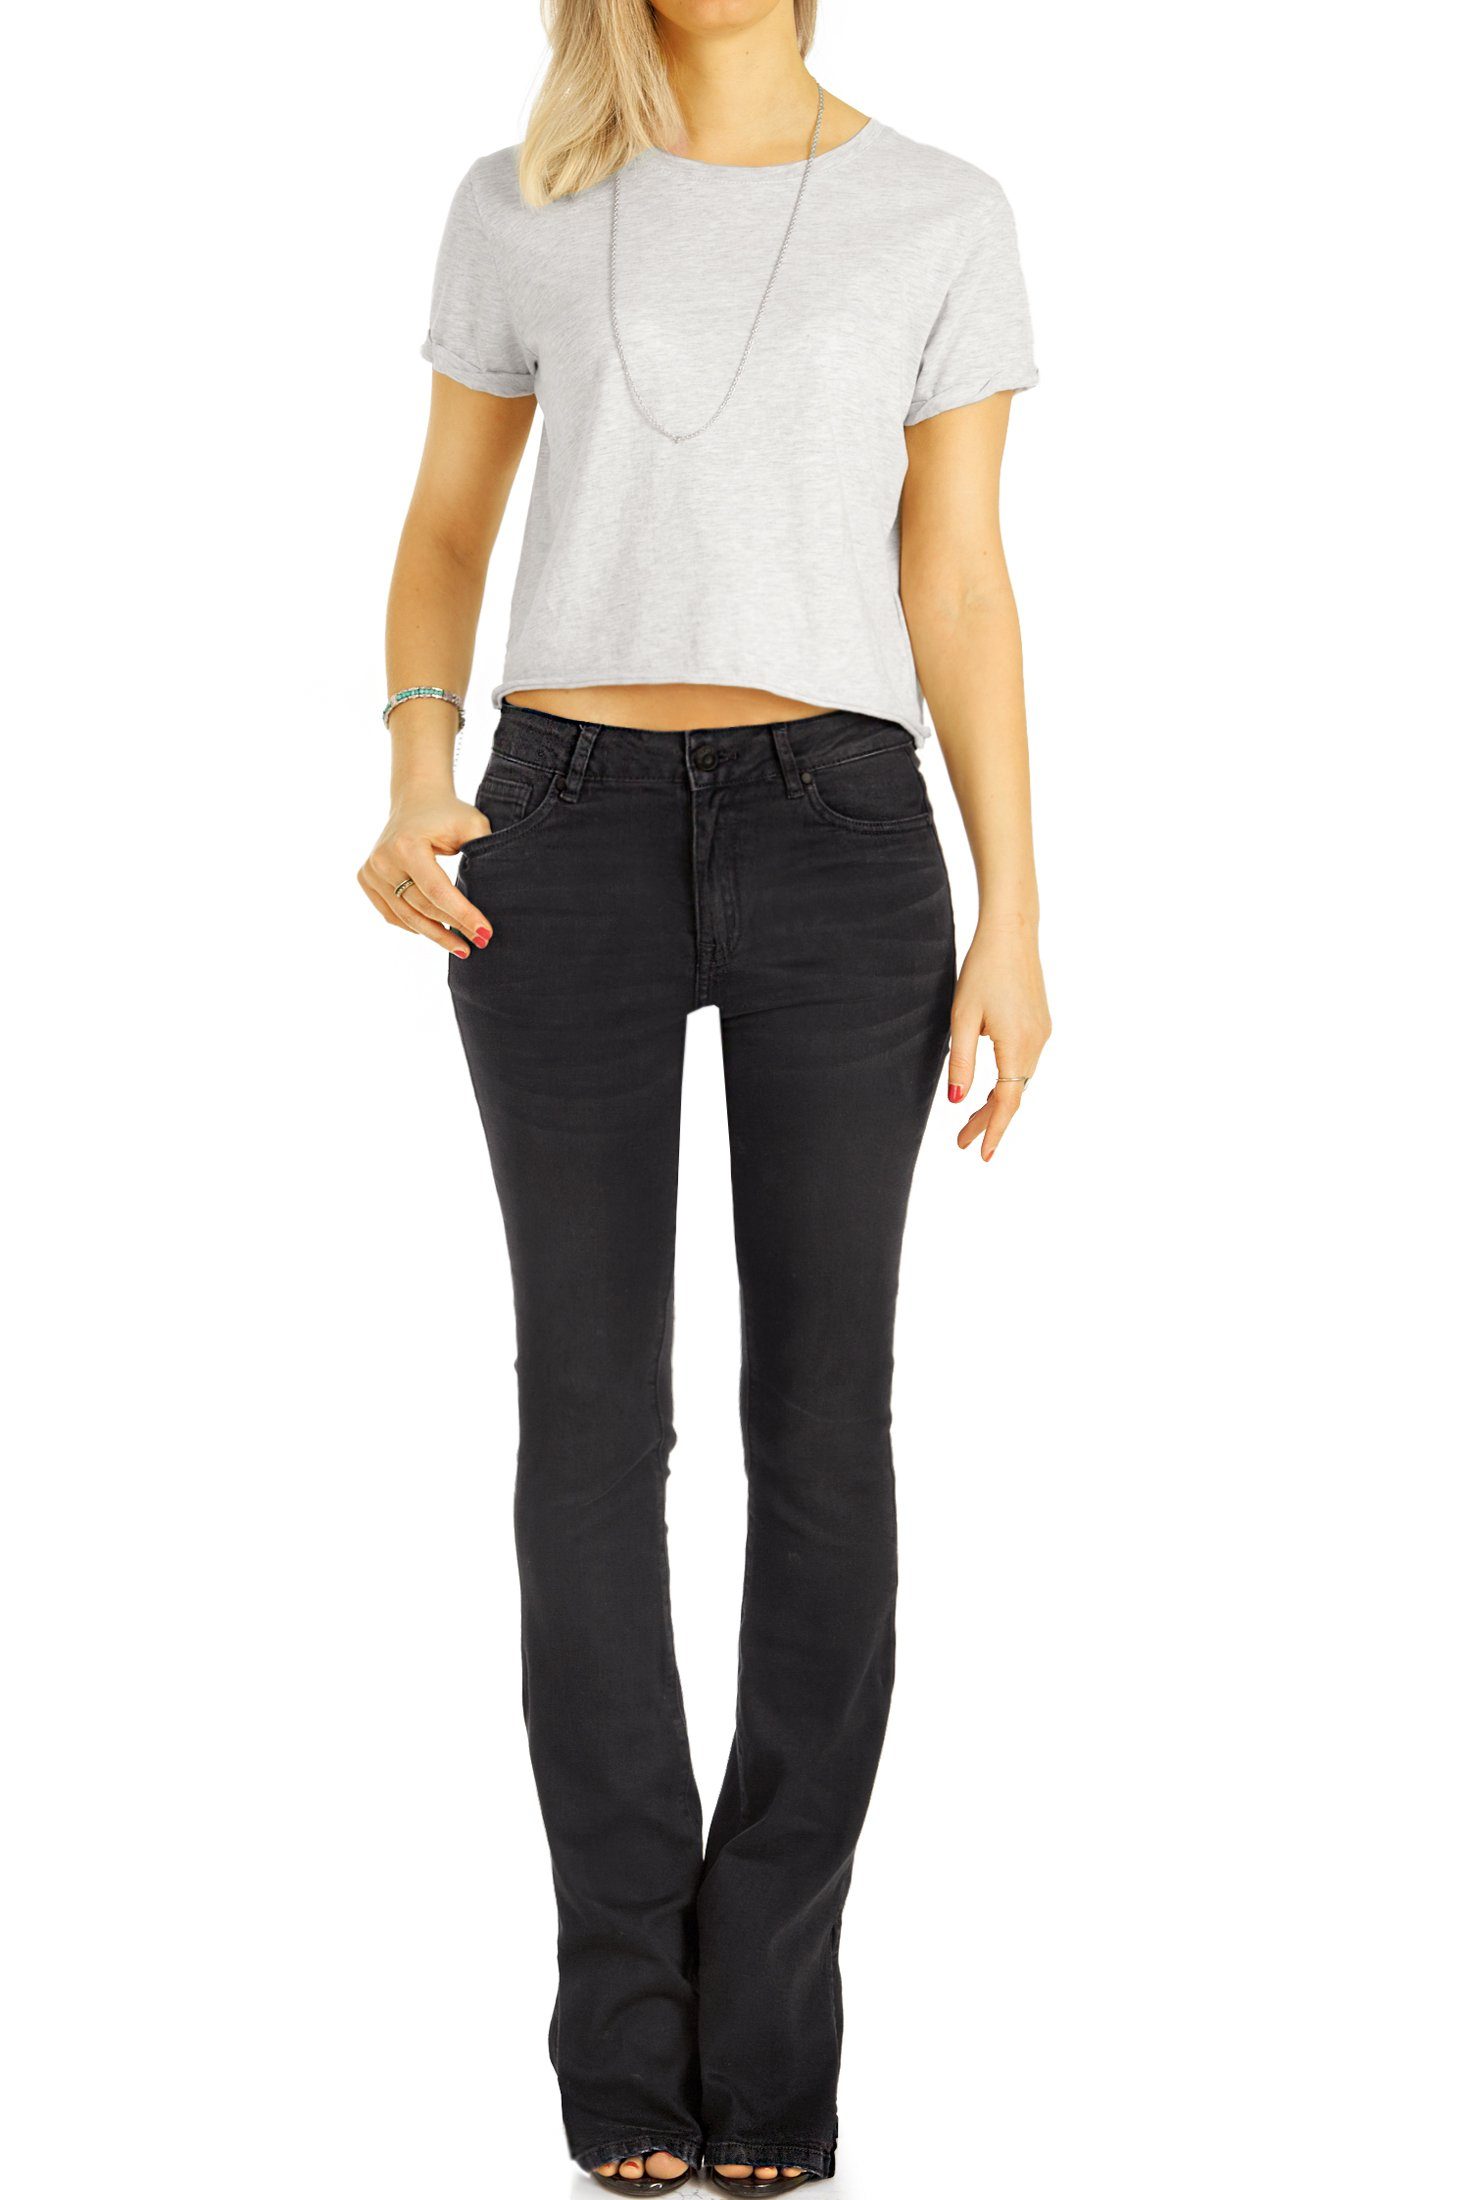 be Hose mit Jeans 5-Pocket-Style Damen - Stretch-Anteil, j27r styled Bootcut-Jeans cut waist mid out - Bootcut mit